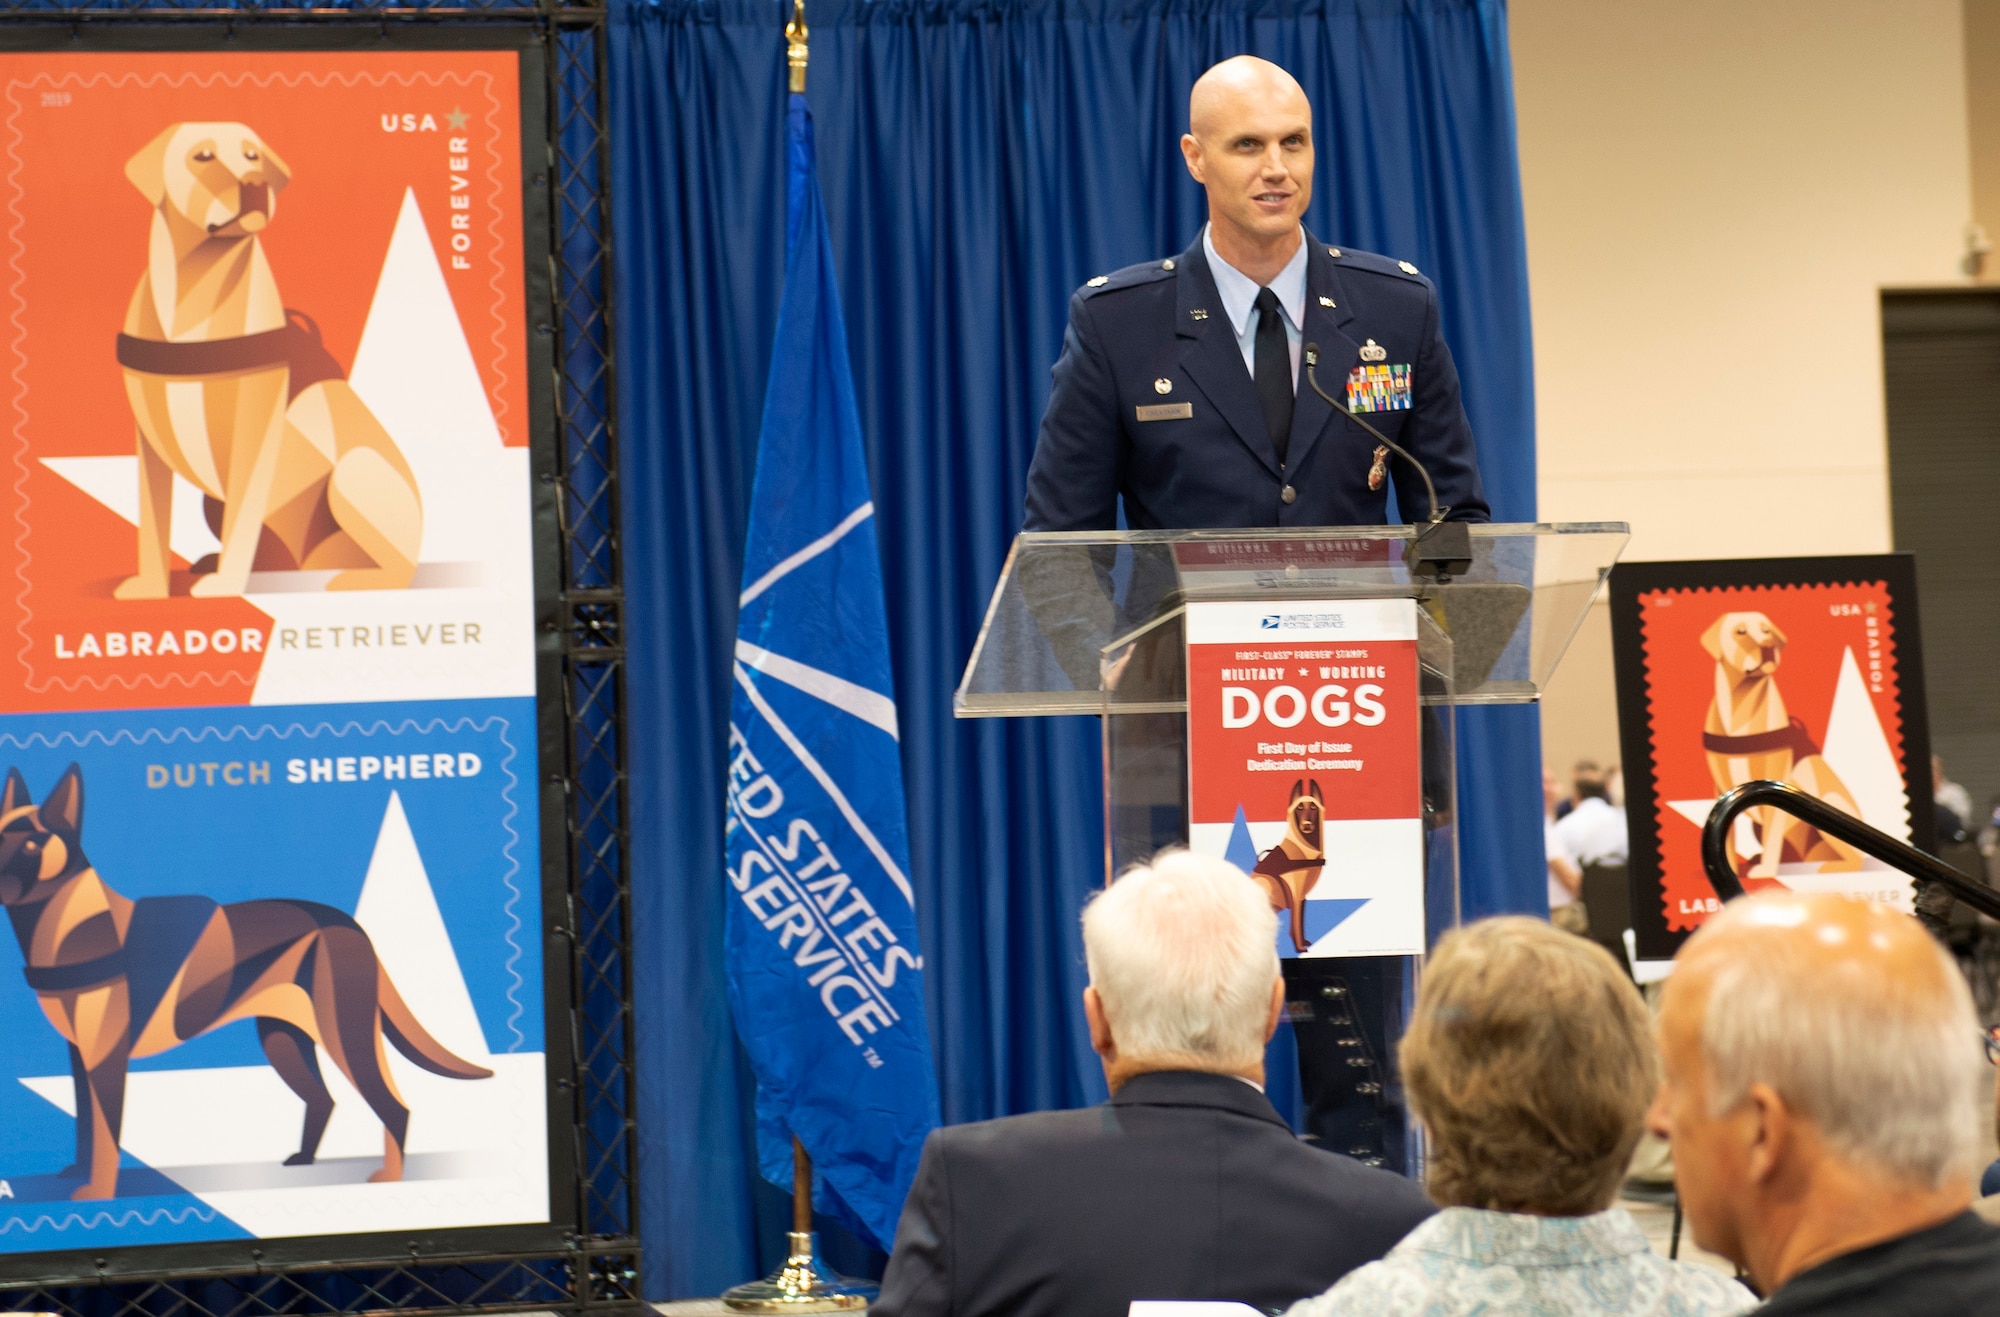 Lt. Col. Michael Cheatham, 55th Security Forces U.S. Air Force Lt. Col. Michael Cheatham, 55th Security Forces Squadron commander, speaks at the unveiling of the Military Working Dog stamp during the American Philatelic Society’s 133rd annual convention Aug. 1, 2019, held at the Catholic Health Initiatives Health Center in Omaha, Nebraska. Cheatham thanked the United States Postal Service for the recognition and immortalizing Military Working Dogs in a widespread public and iconic way. (U.S. Air Force photo by L. Cunningham)Squadron, commander speaks at the unveiling of the Military Working Dog stamp during the American Philatelic Society’s 133rd annual convention Aug. 1, 2019 held at the Catholic Health Initiatives Health Center in Omaha, Nebraska. Cheatham thanked the United States Postal Service for the recognition and immortalizing Military Working Dogs in a widespread public and iconic way. (U.S. photo by L. Cunningham)